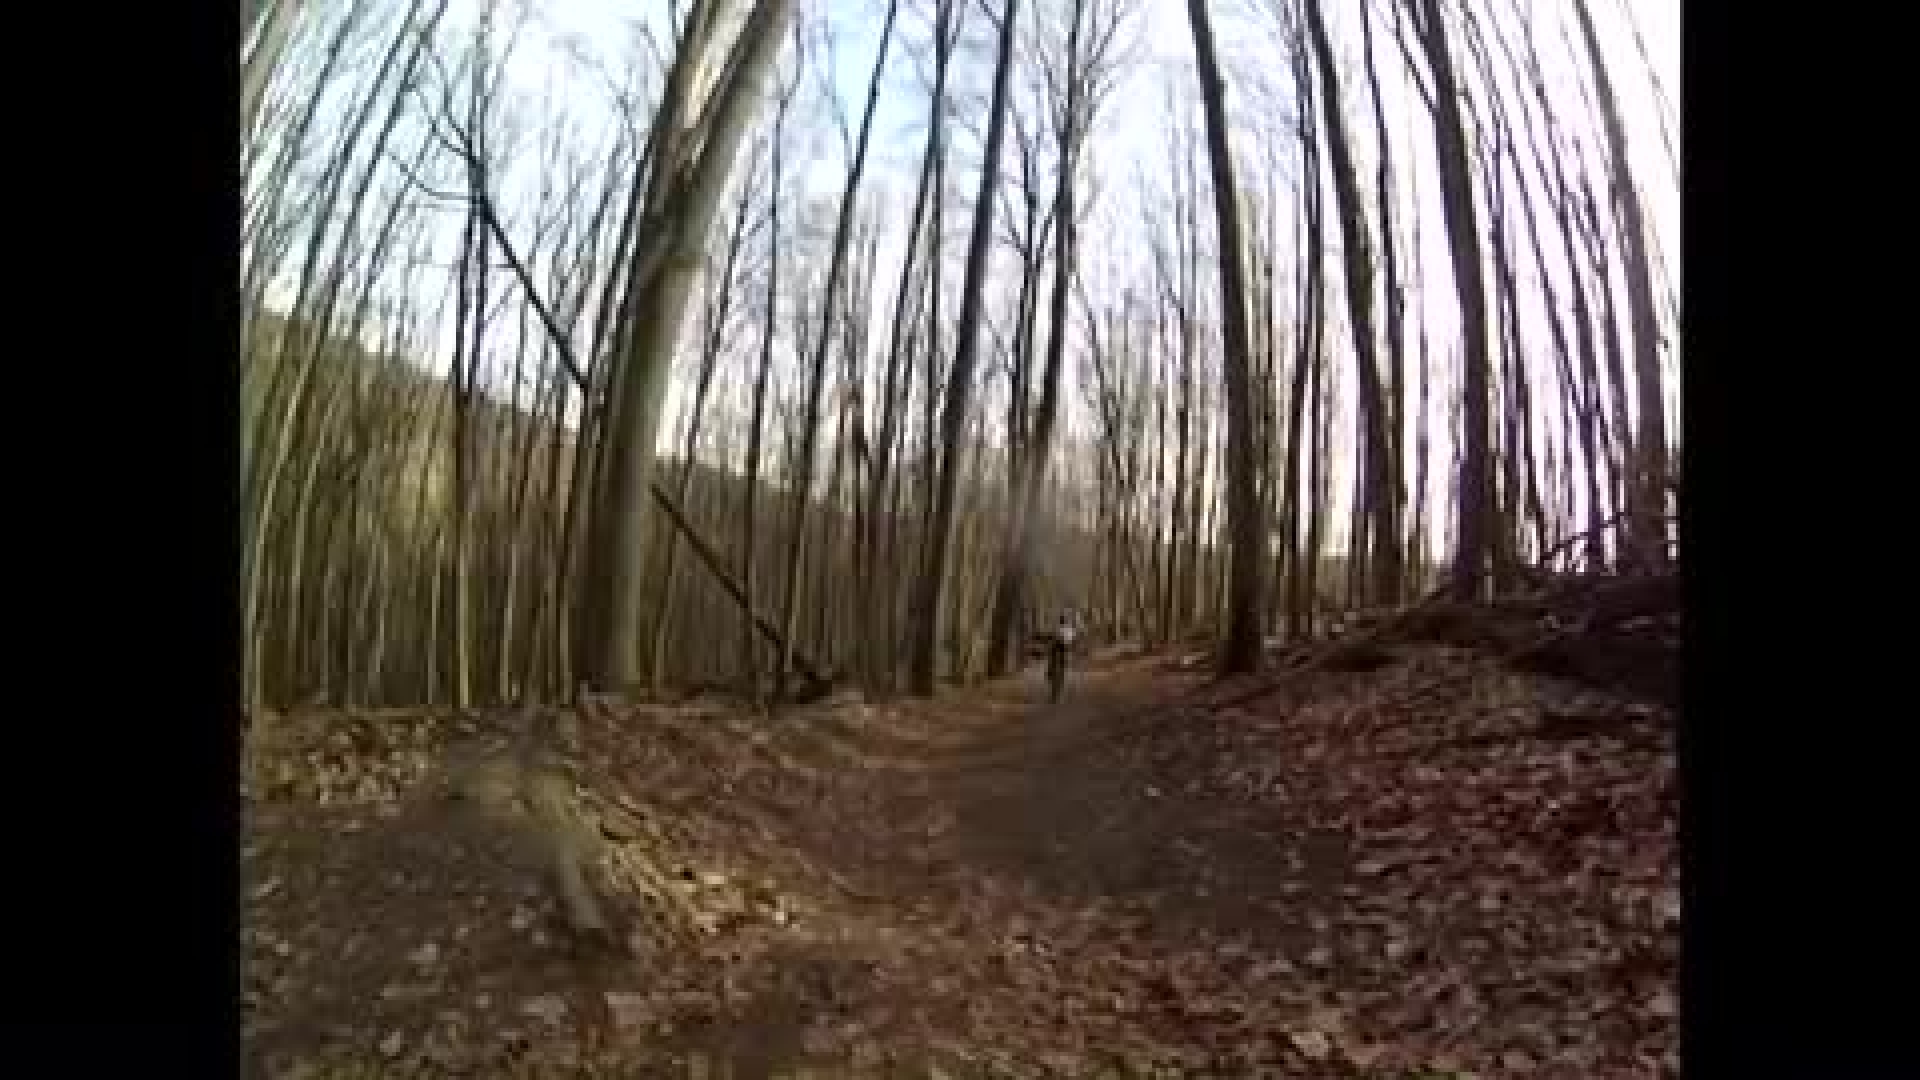 Downhill Whip 2014